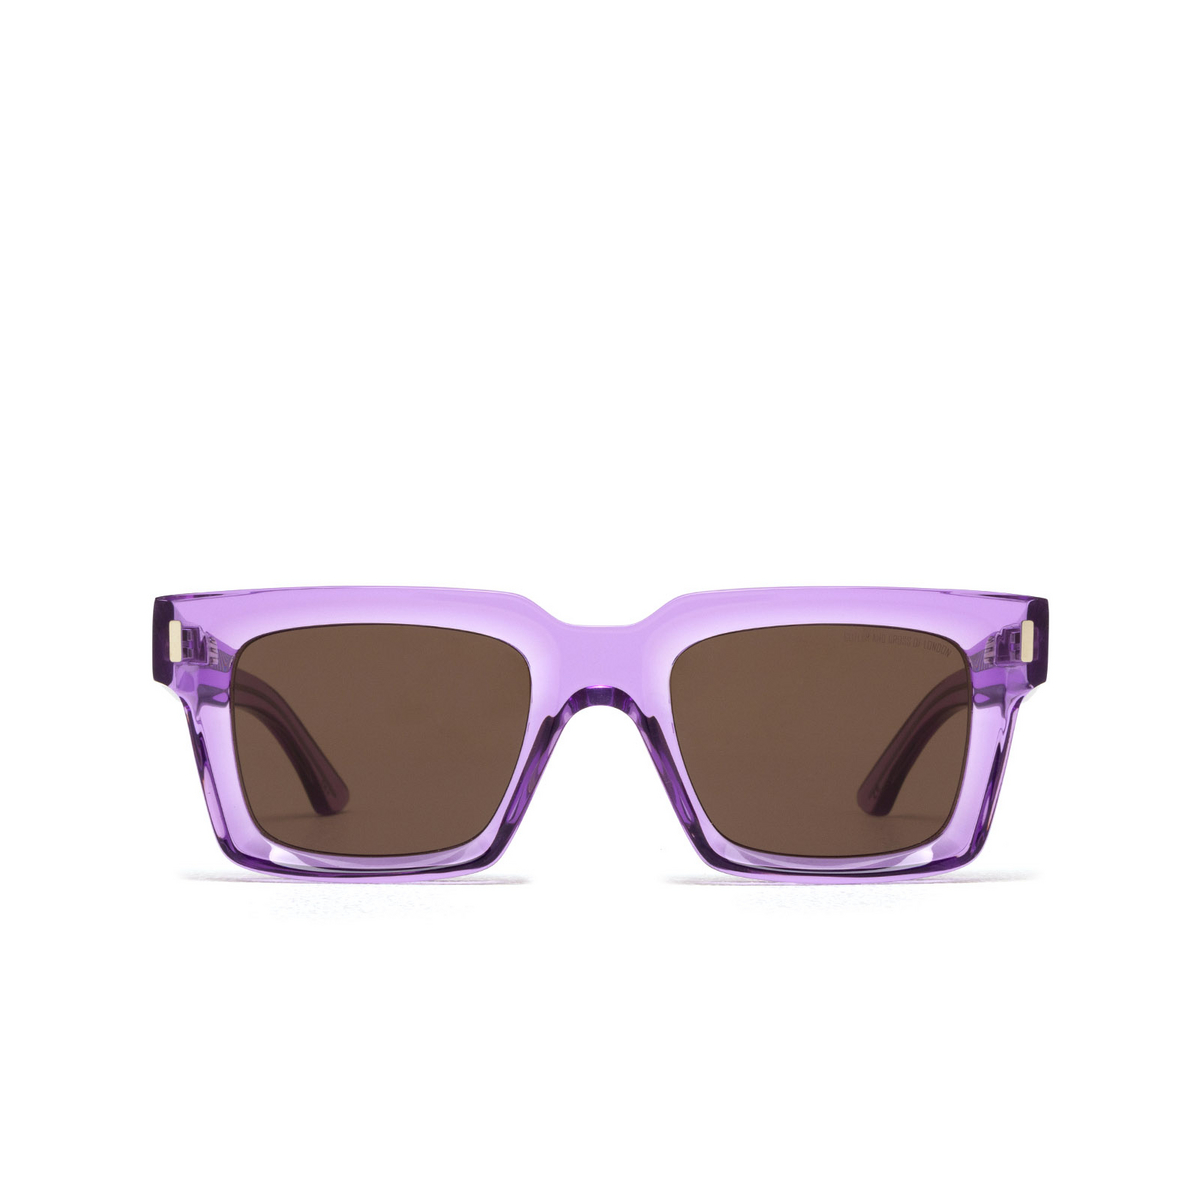 Cutler and Gross 1386 Sunglasses 06 Orchid Crystal - front view